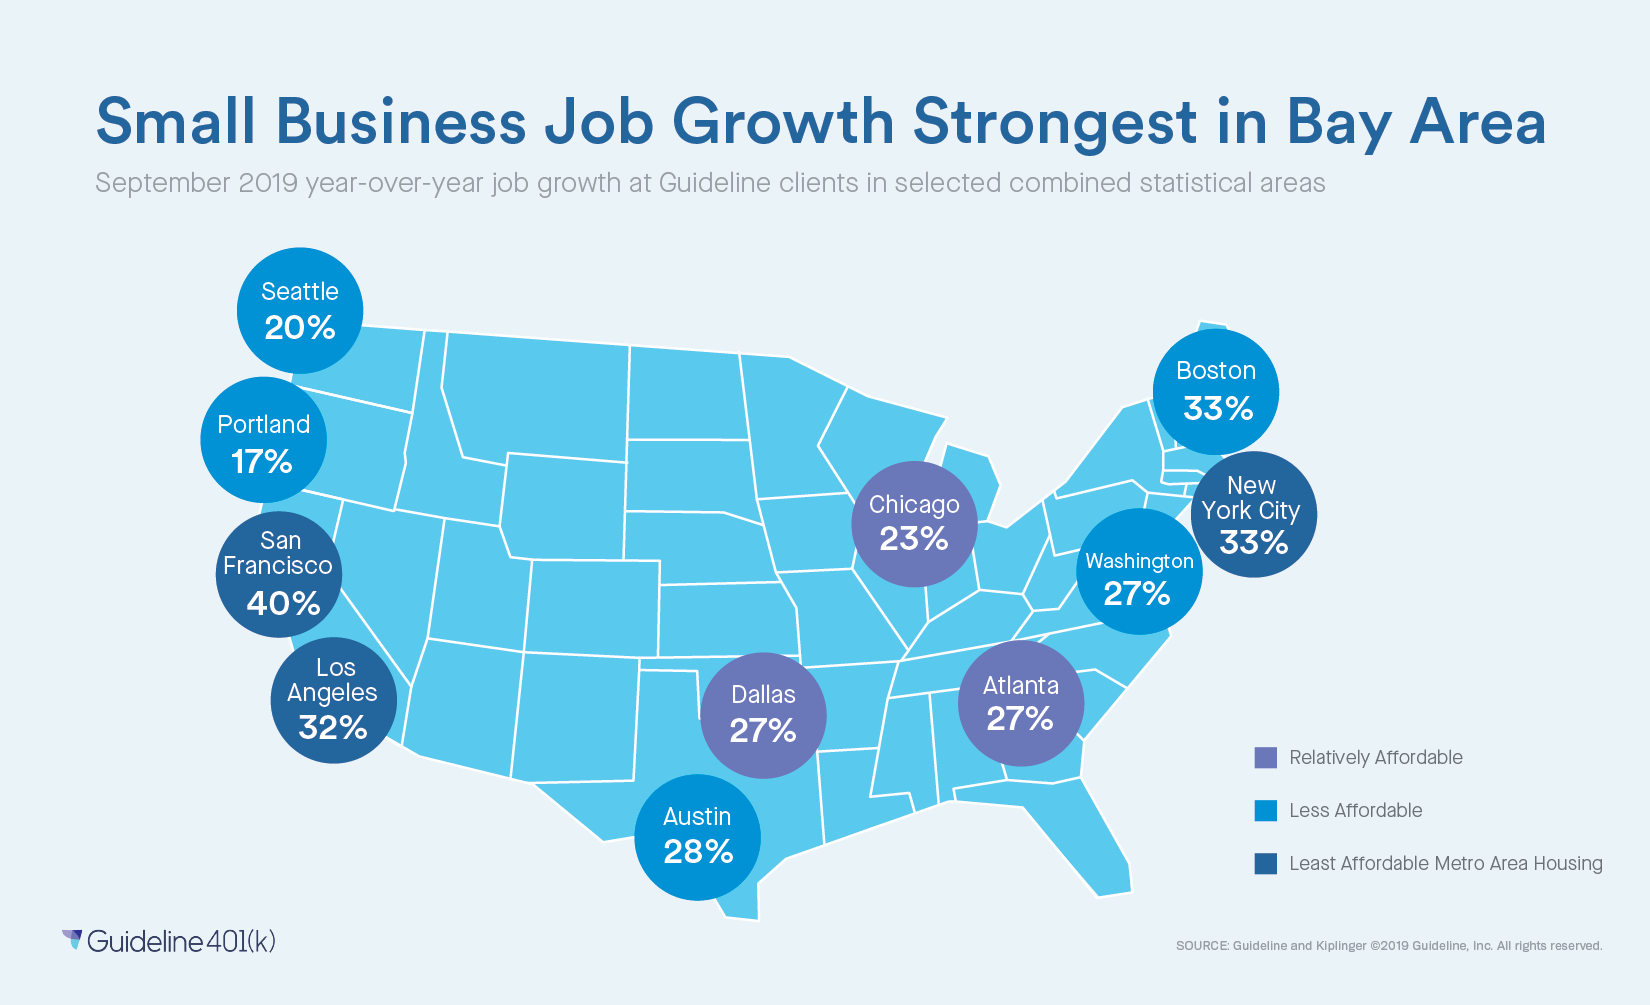 Small Business Job Growth Strongest in Bay Area